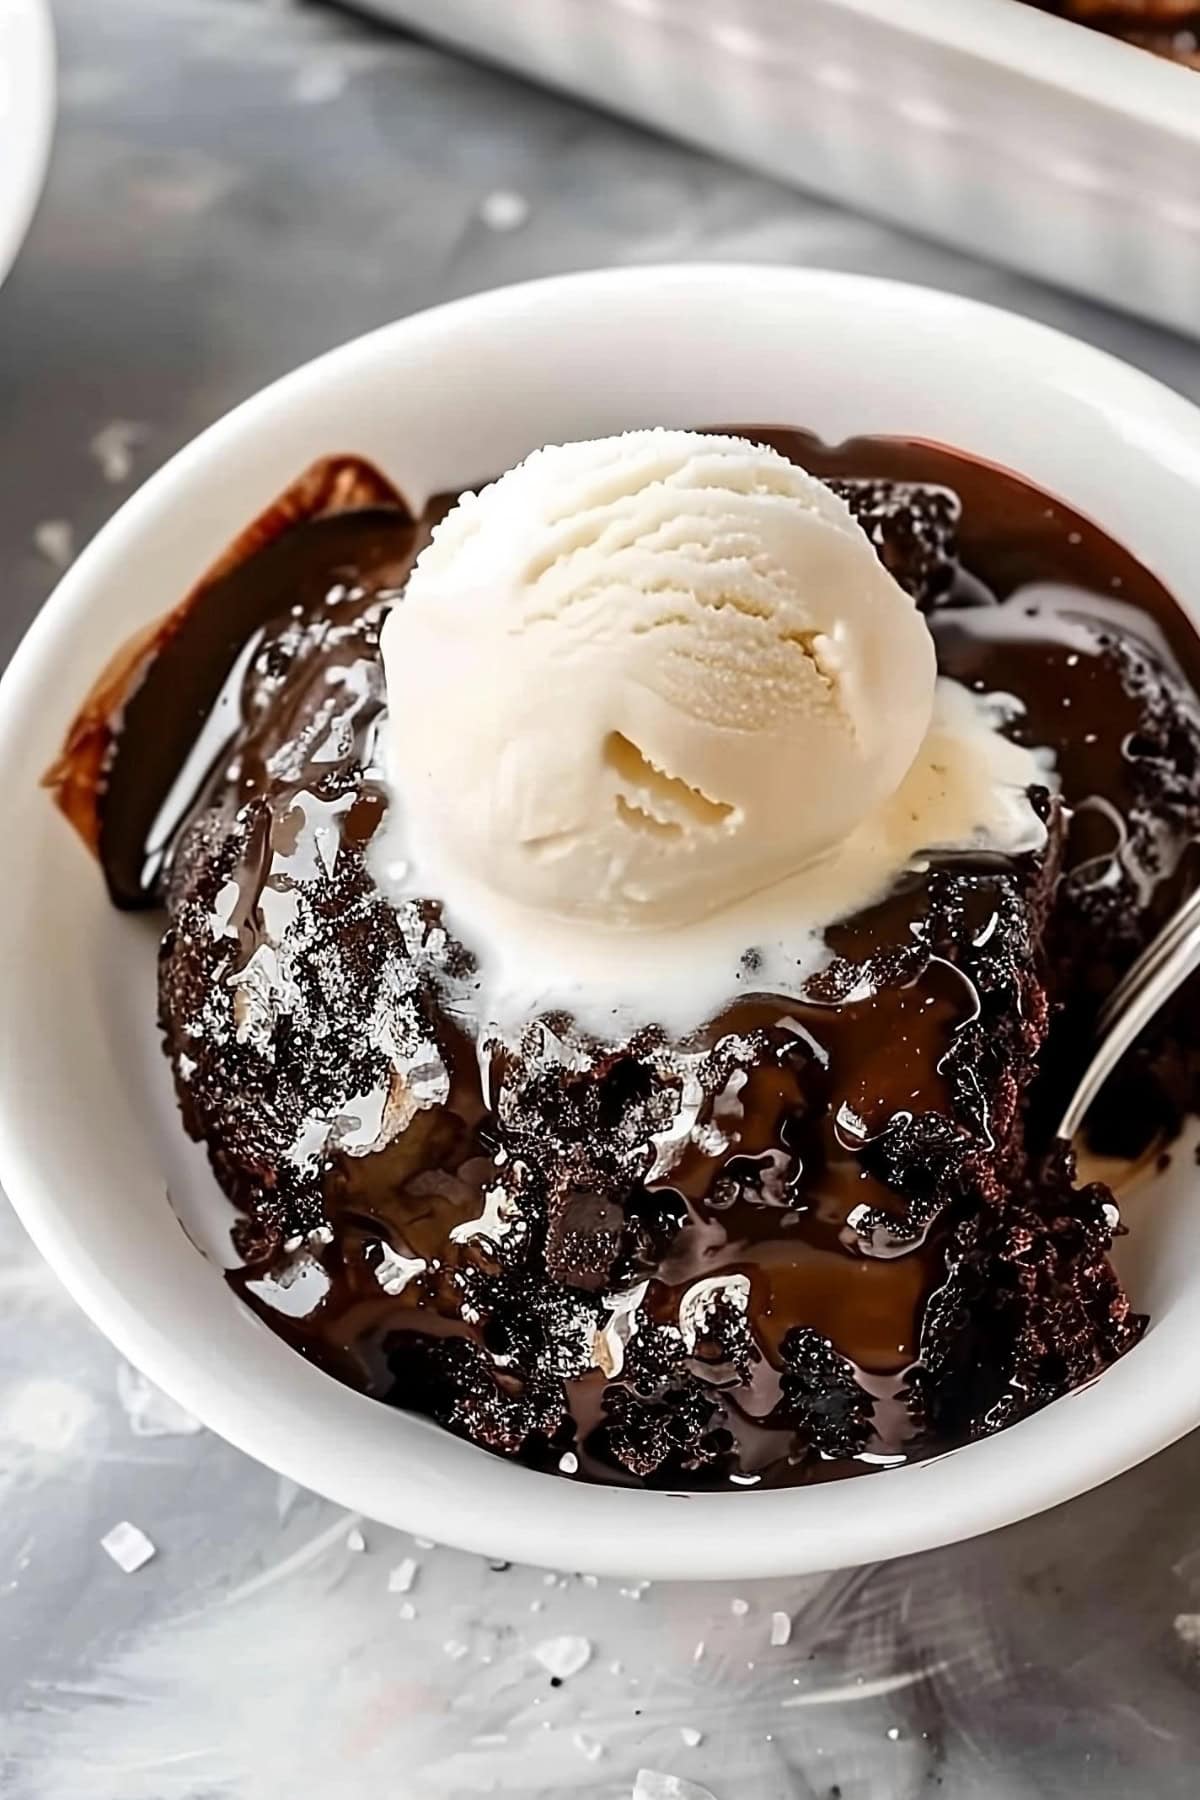 Top view of a serving of hot fudge cake in a white bowl with ice cream.